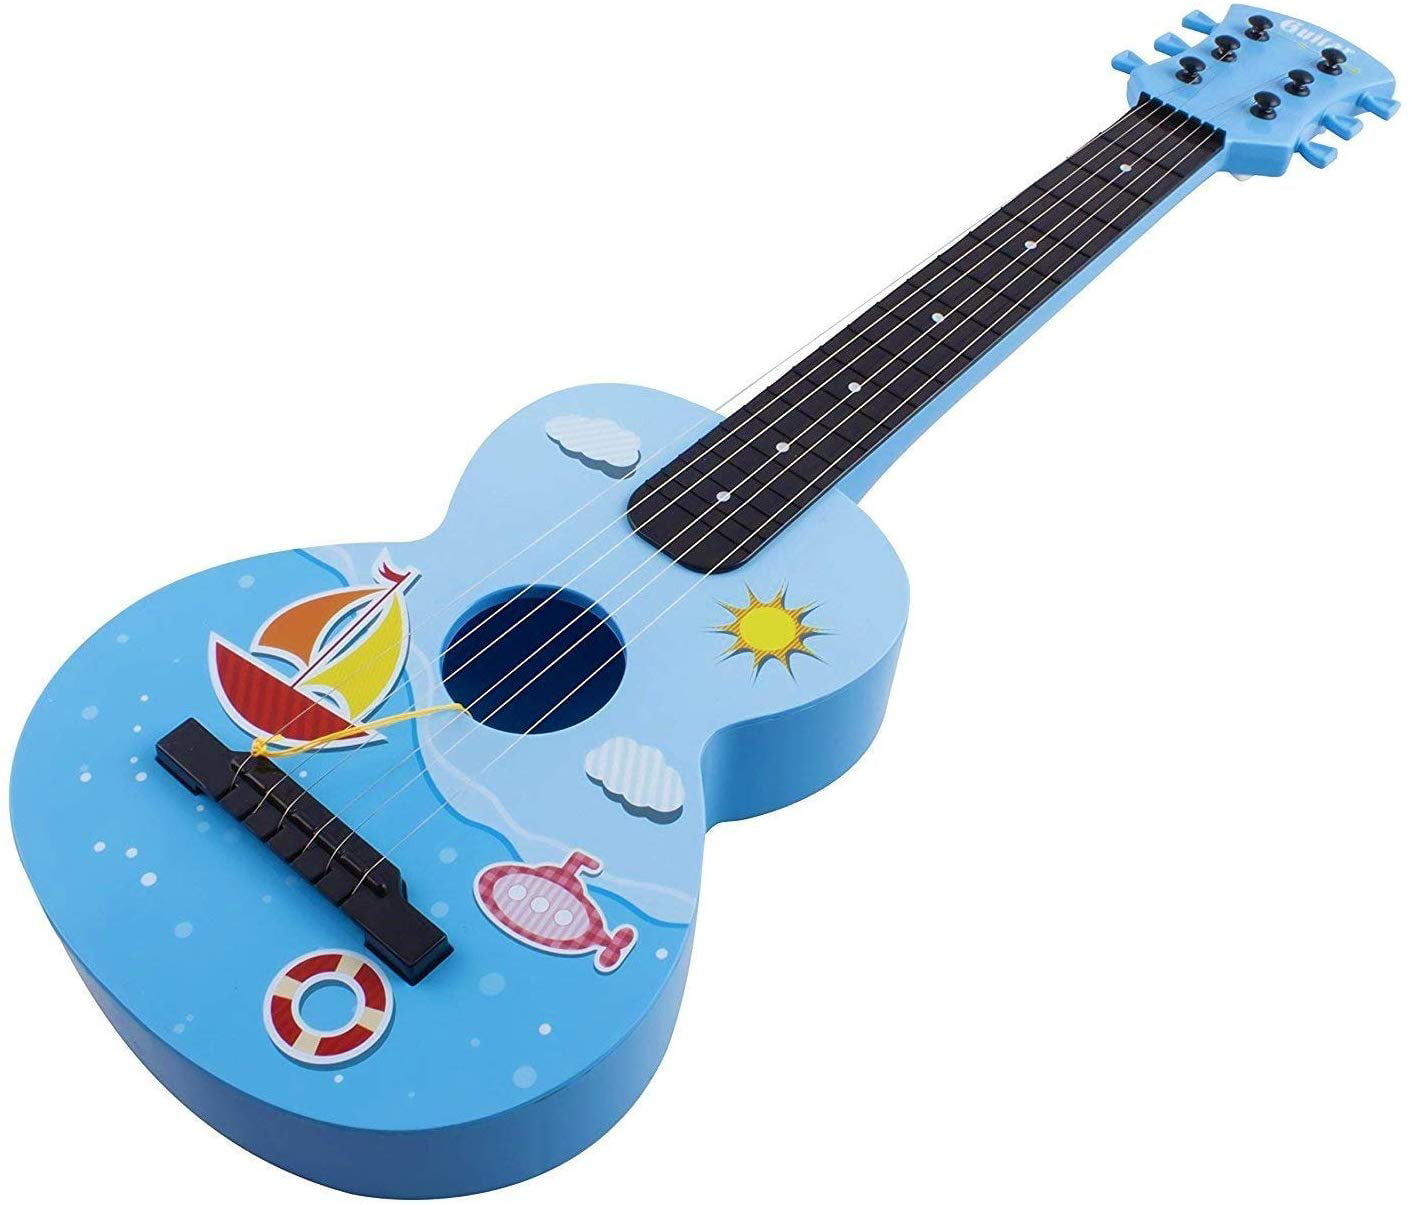 A TO Z KIDS ROCK STAR 67cm GUITAR WITH METAL STRINGS